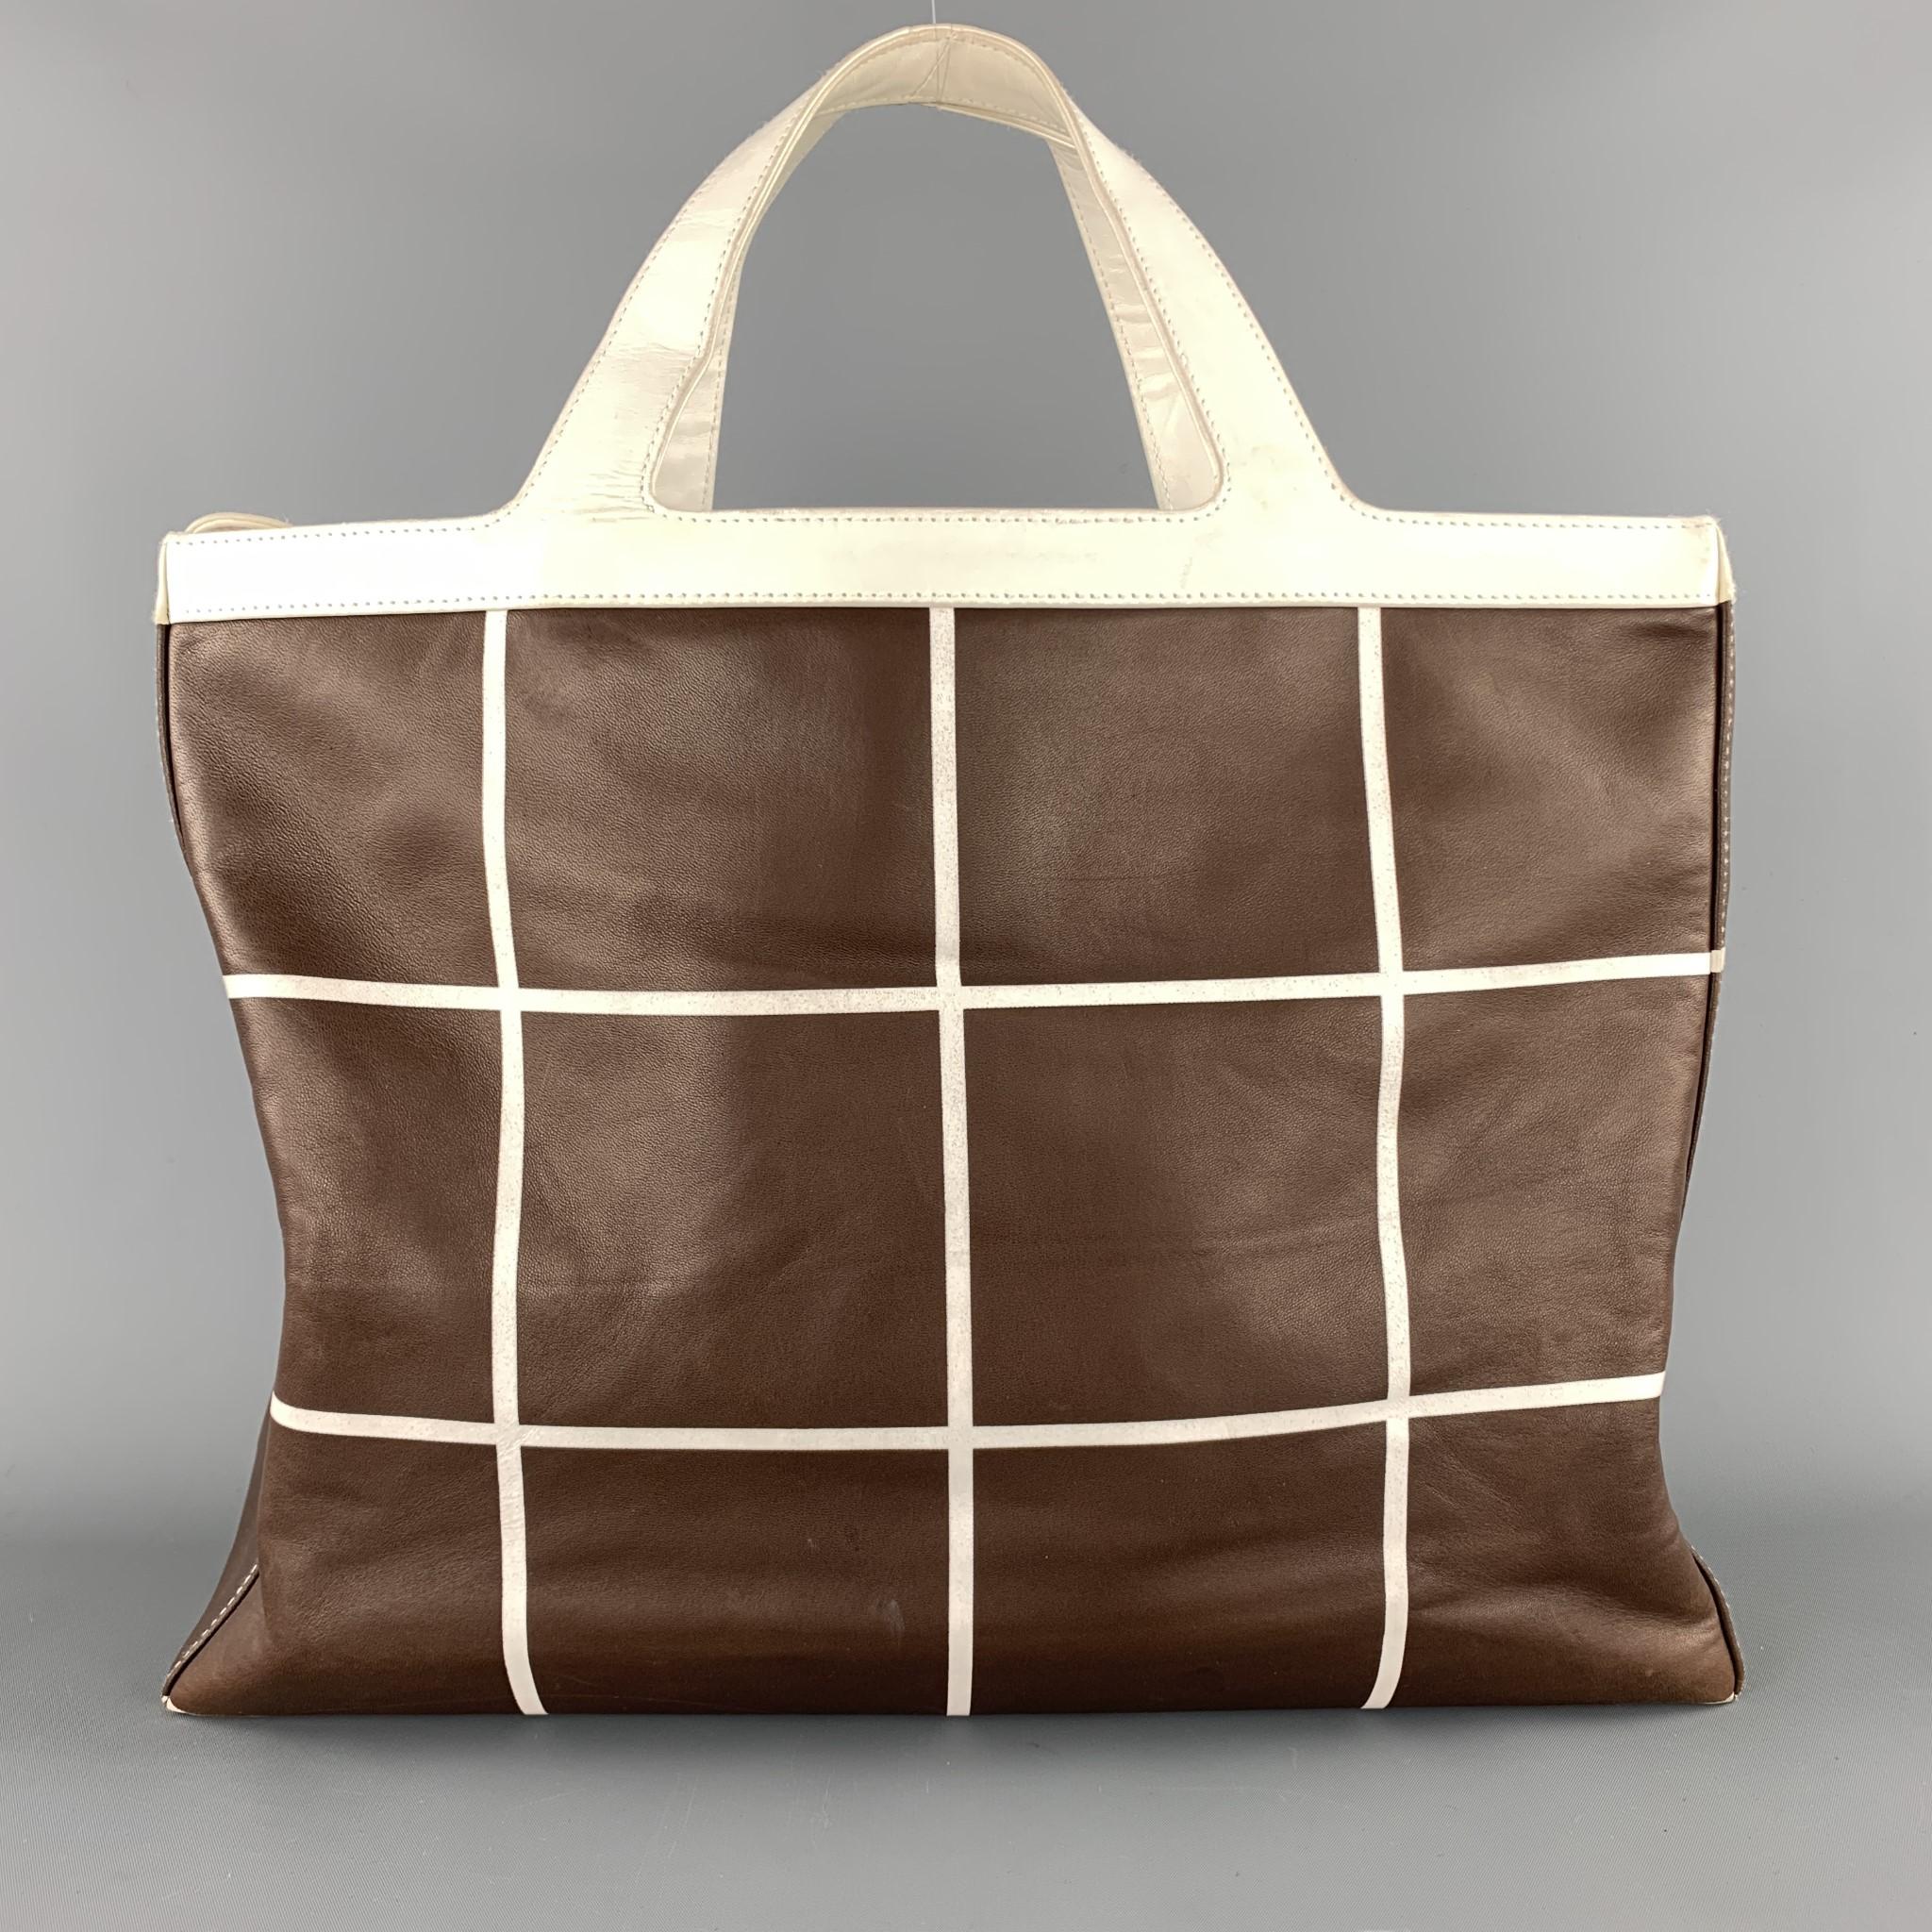 Vintage RALPH LAUREN Tote bag comes in brown and cream grid print leather with cream leather top handles, and gold tone RL hardware top closure. 

Very Good Pre-Owned Condition.

Measurements:

Length: 15.5 in.
Width: 4.75 in.
Height: 12 in. 

SKU: